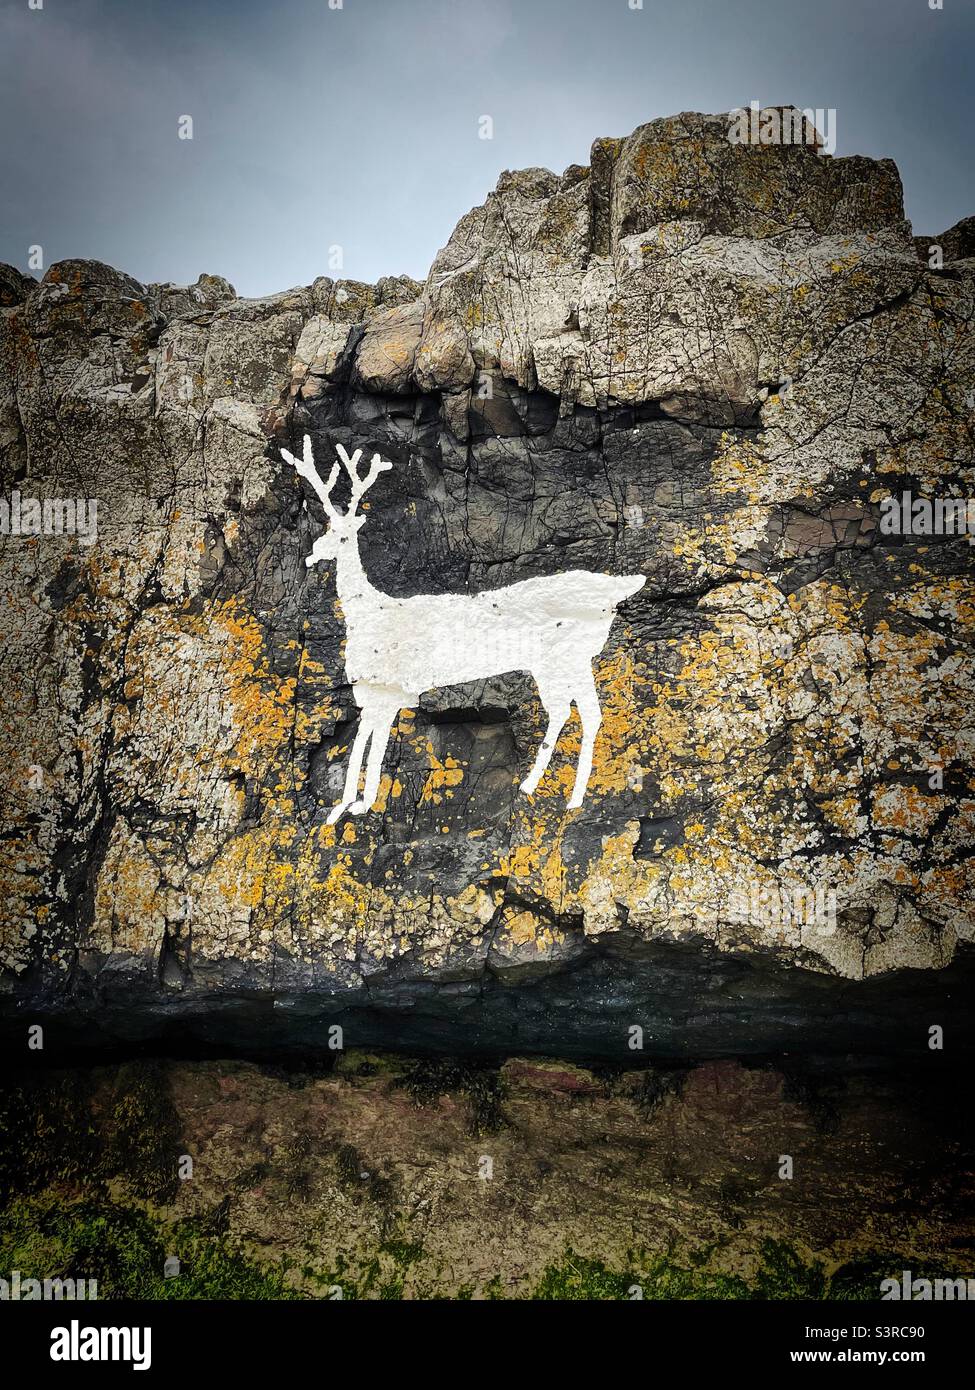 ‘The White Stag of Bambburgh’ il famoso White Stag dipinto di Bambburgh a Stags Rock, Bambburgh Beach, Northumberland Foto Stock